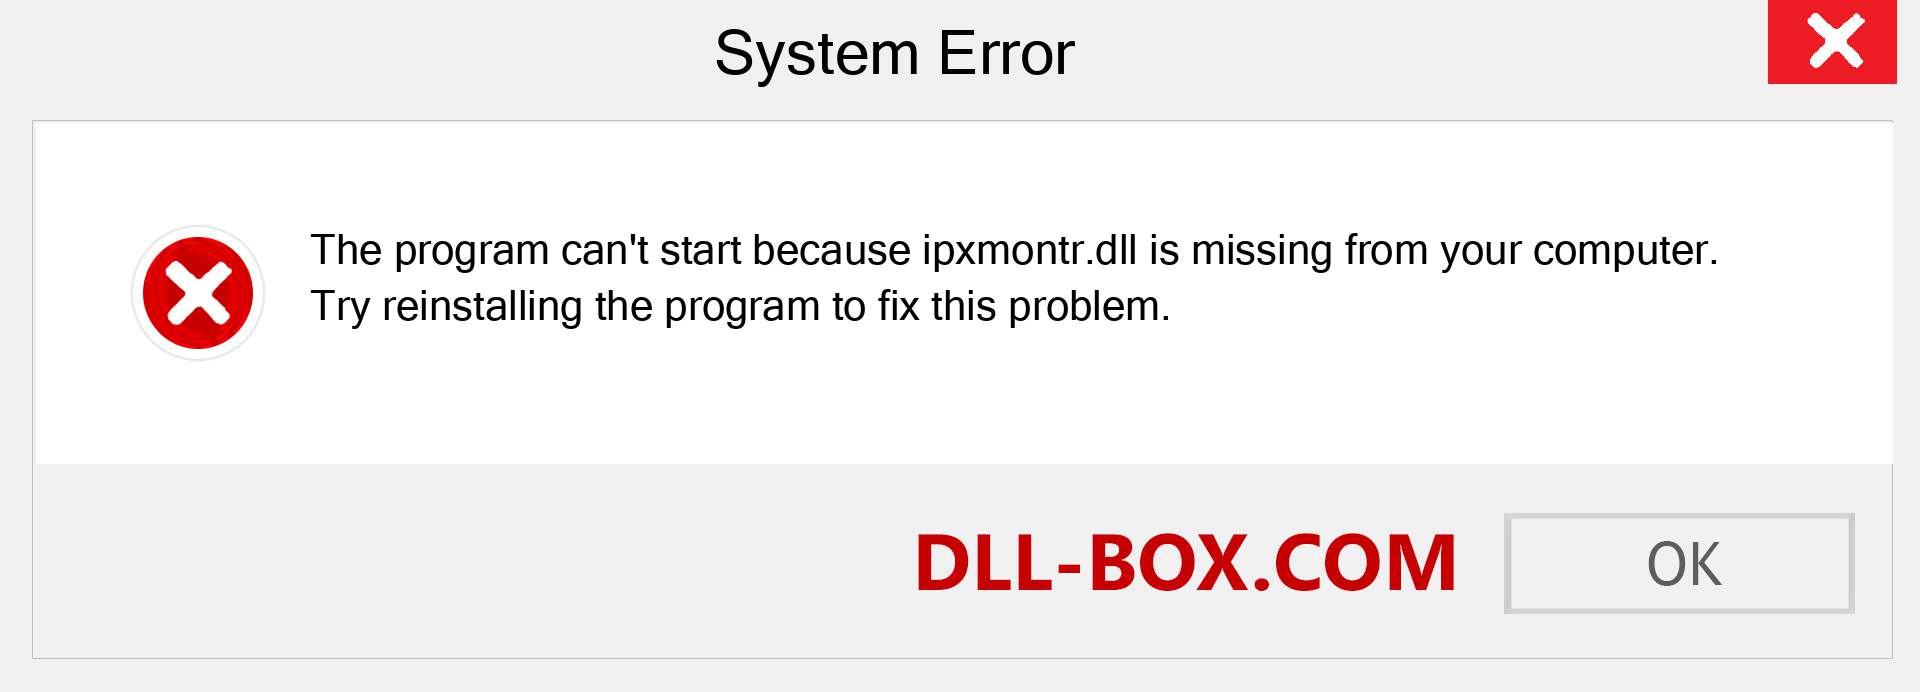  ipxmontr.dll file is missing?. Download for Windows 7, 8, 10 - Fix  ipxmontr dll Missing Error on Windows, photos, images